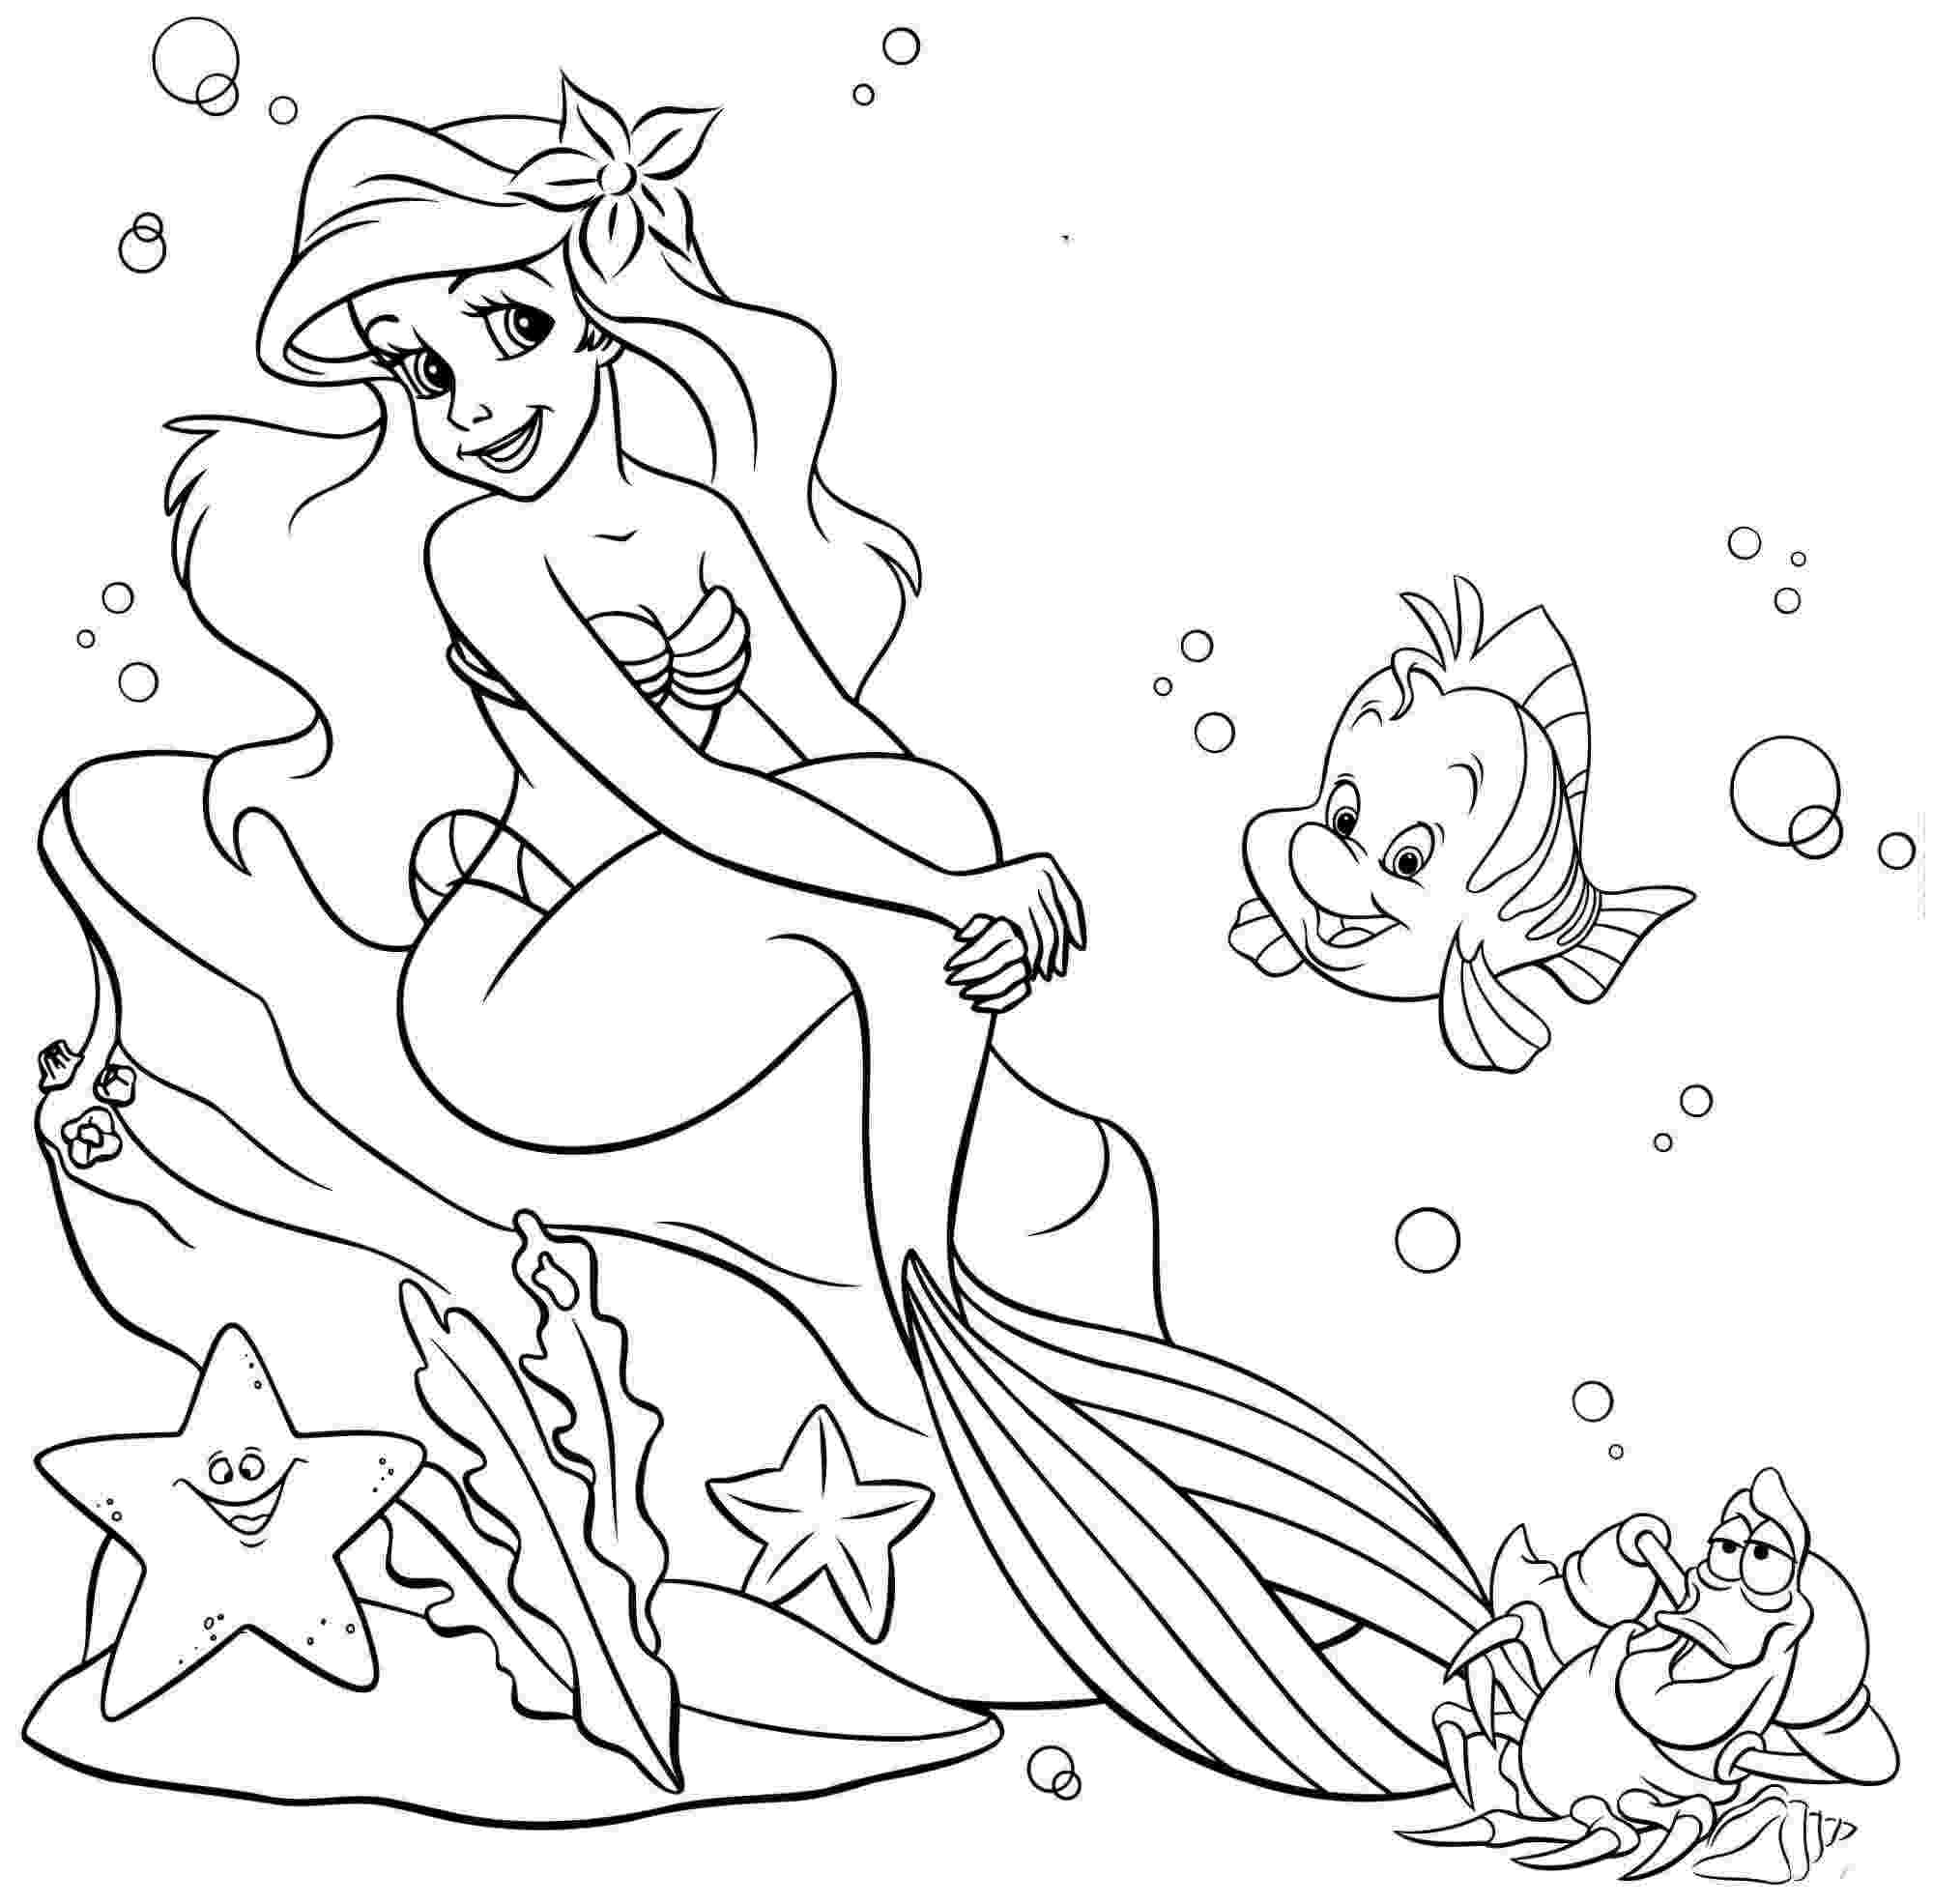 little mermaid printable coloring pages little mermaid coloring pages coloring pages coloring little mermaid printable pages 